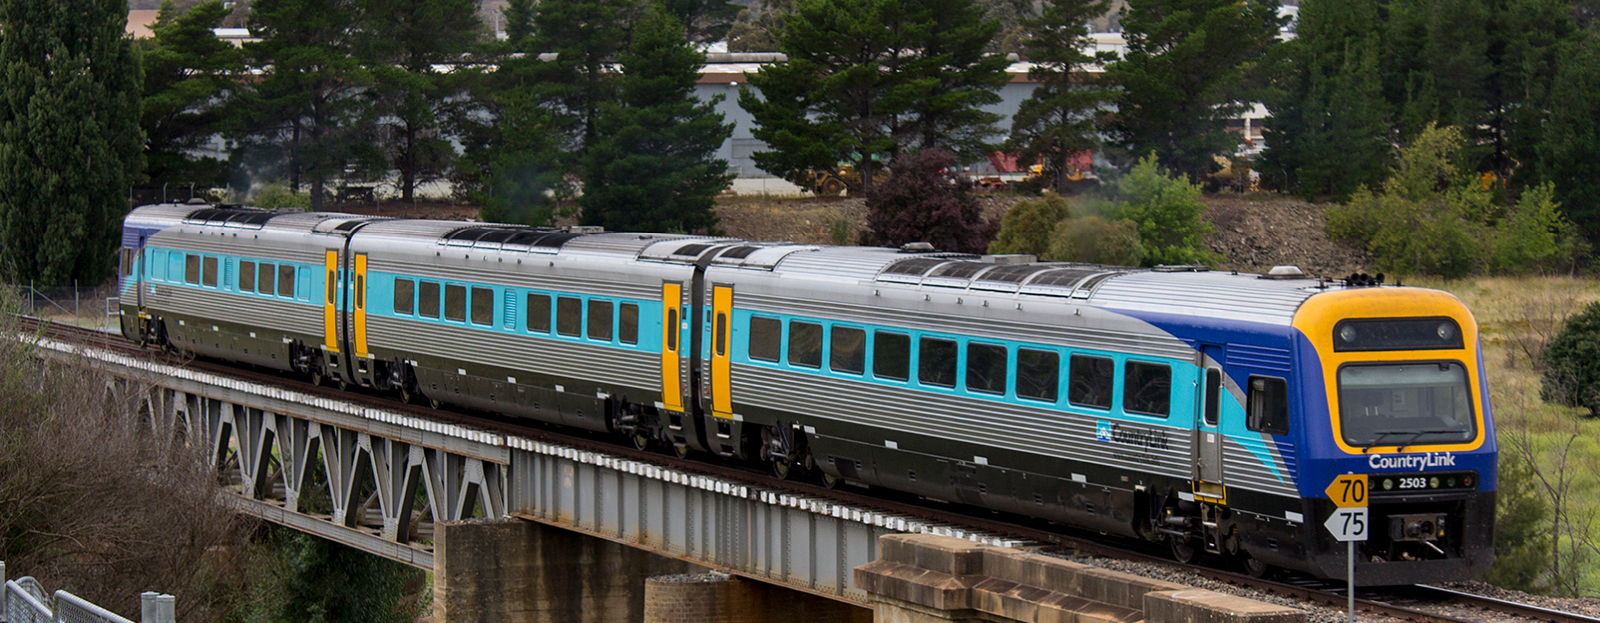 CountryLink Xplorer crossing the Queanbeyan River at Oaks Estate in January 2012